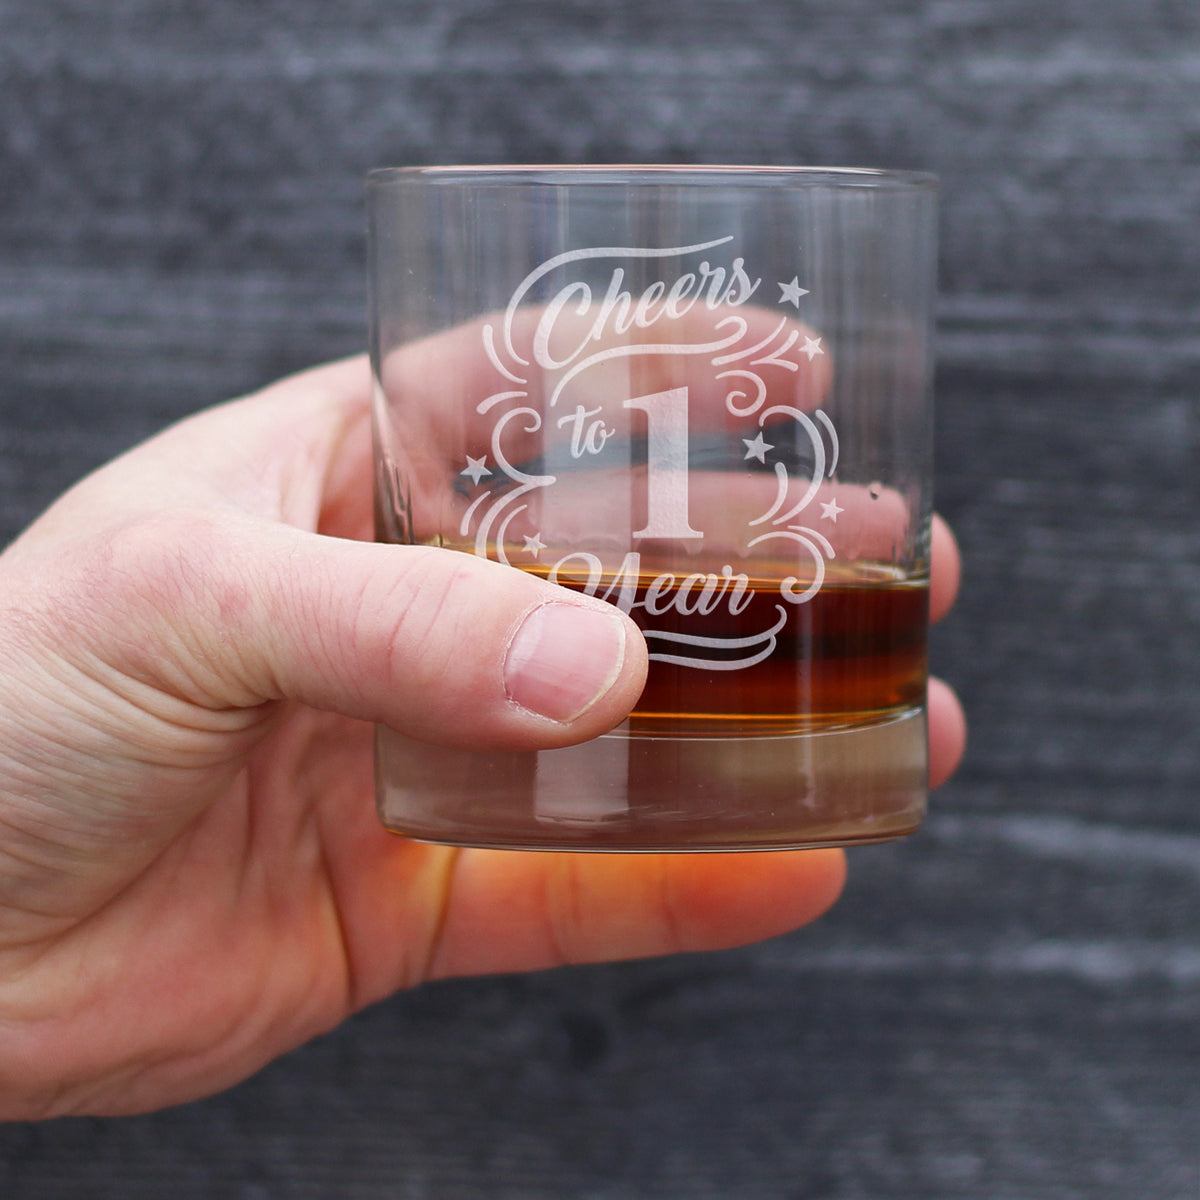 Cheers to 1 Year - Whiskey Rocks Glass Gifts for Women &amp; Men - 1st Anniversary Party Decor - 10.25 Oz Glasses